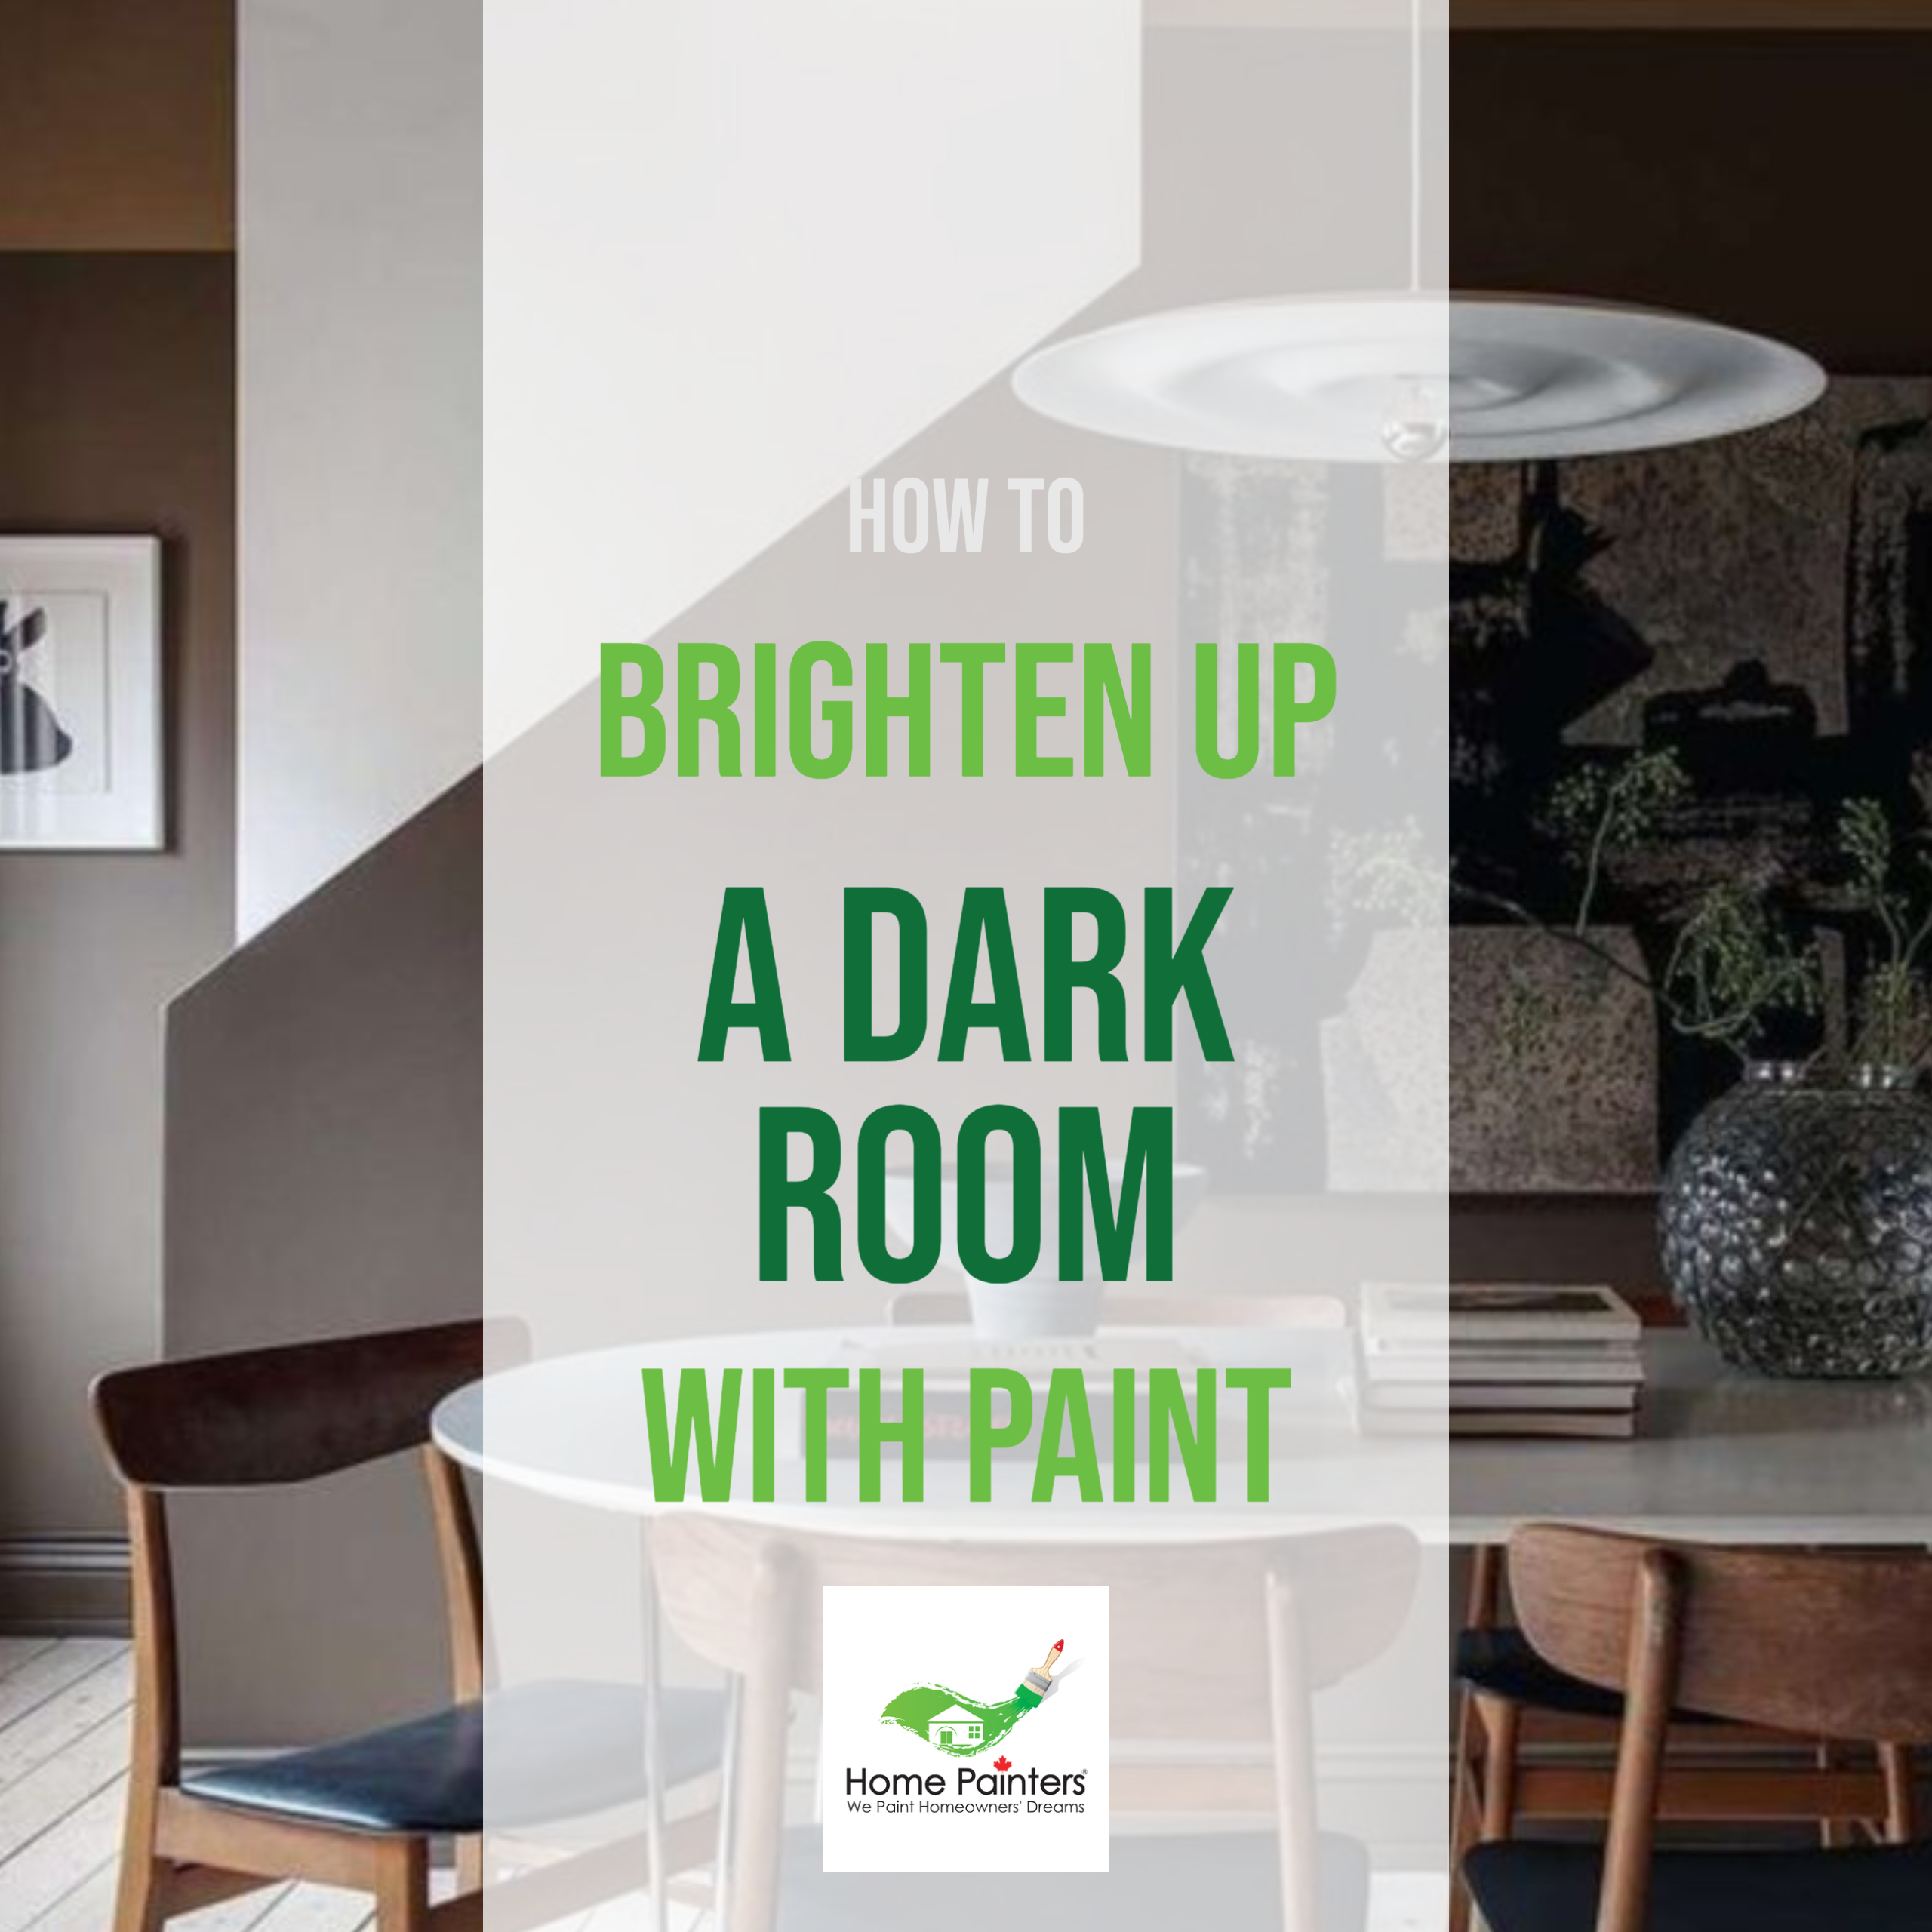 How To Brighten Up A Dark Room With Paint - Home Painters Toronto